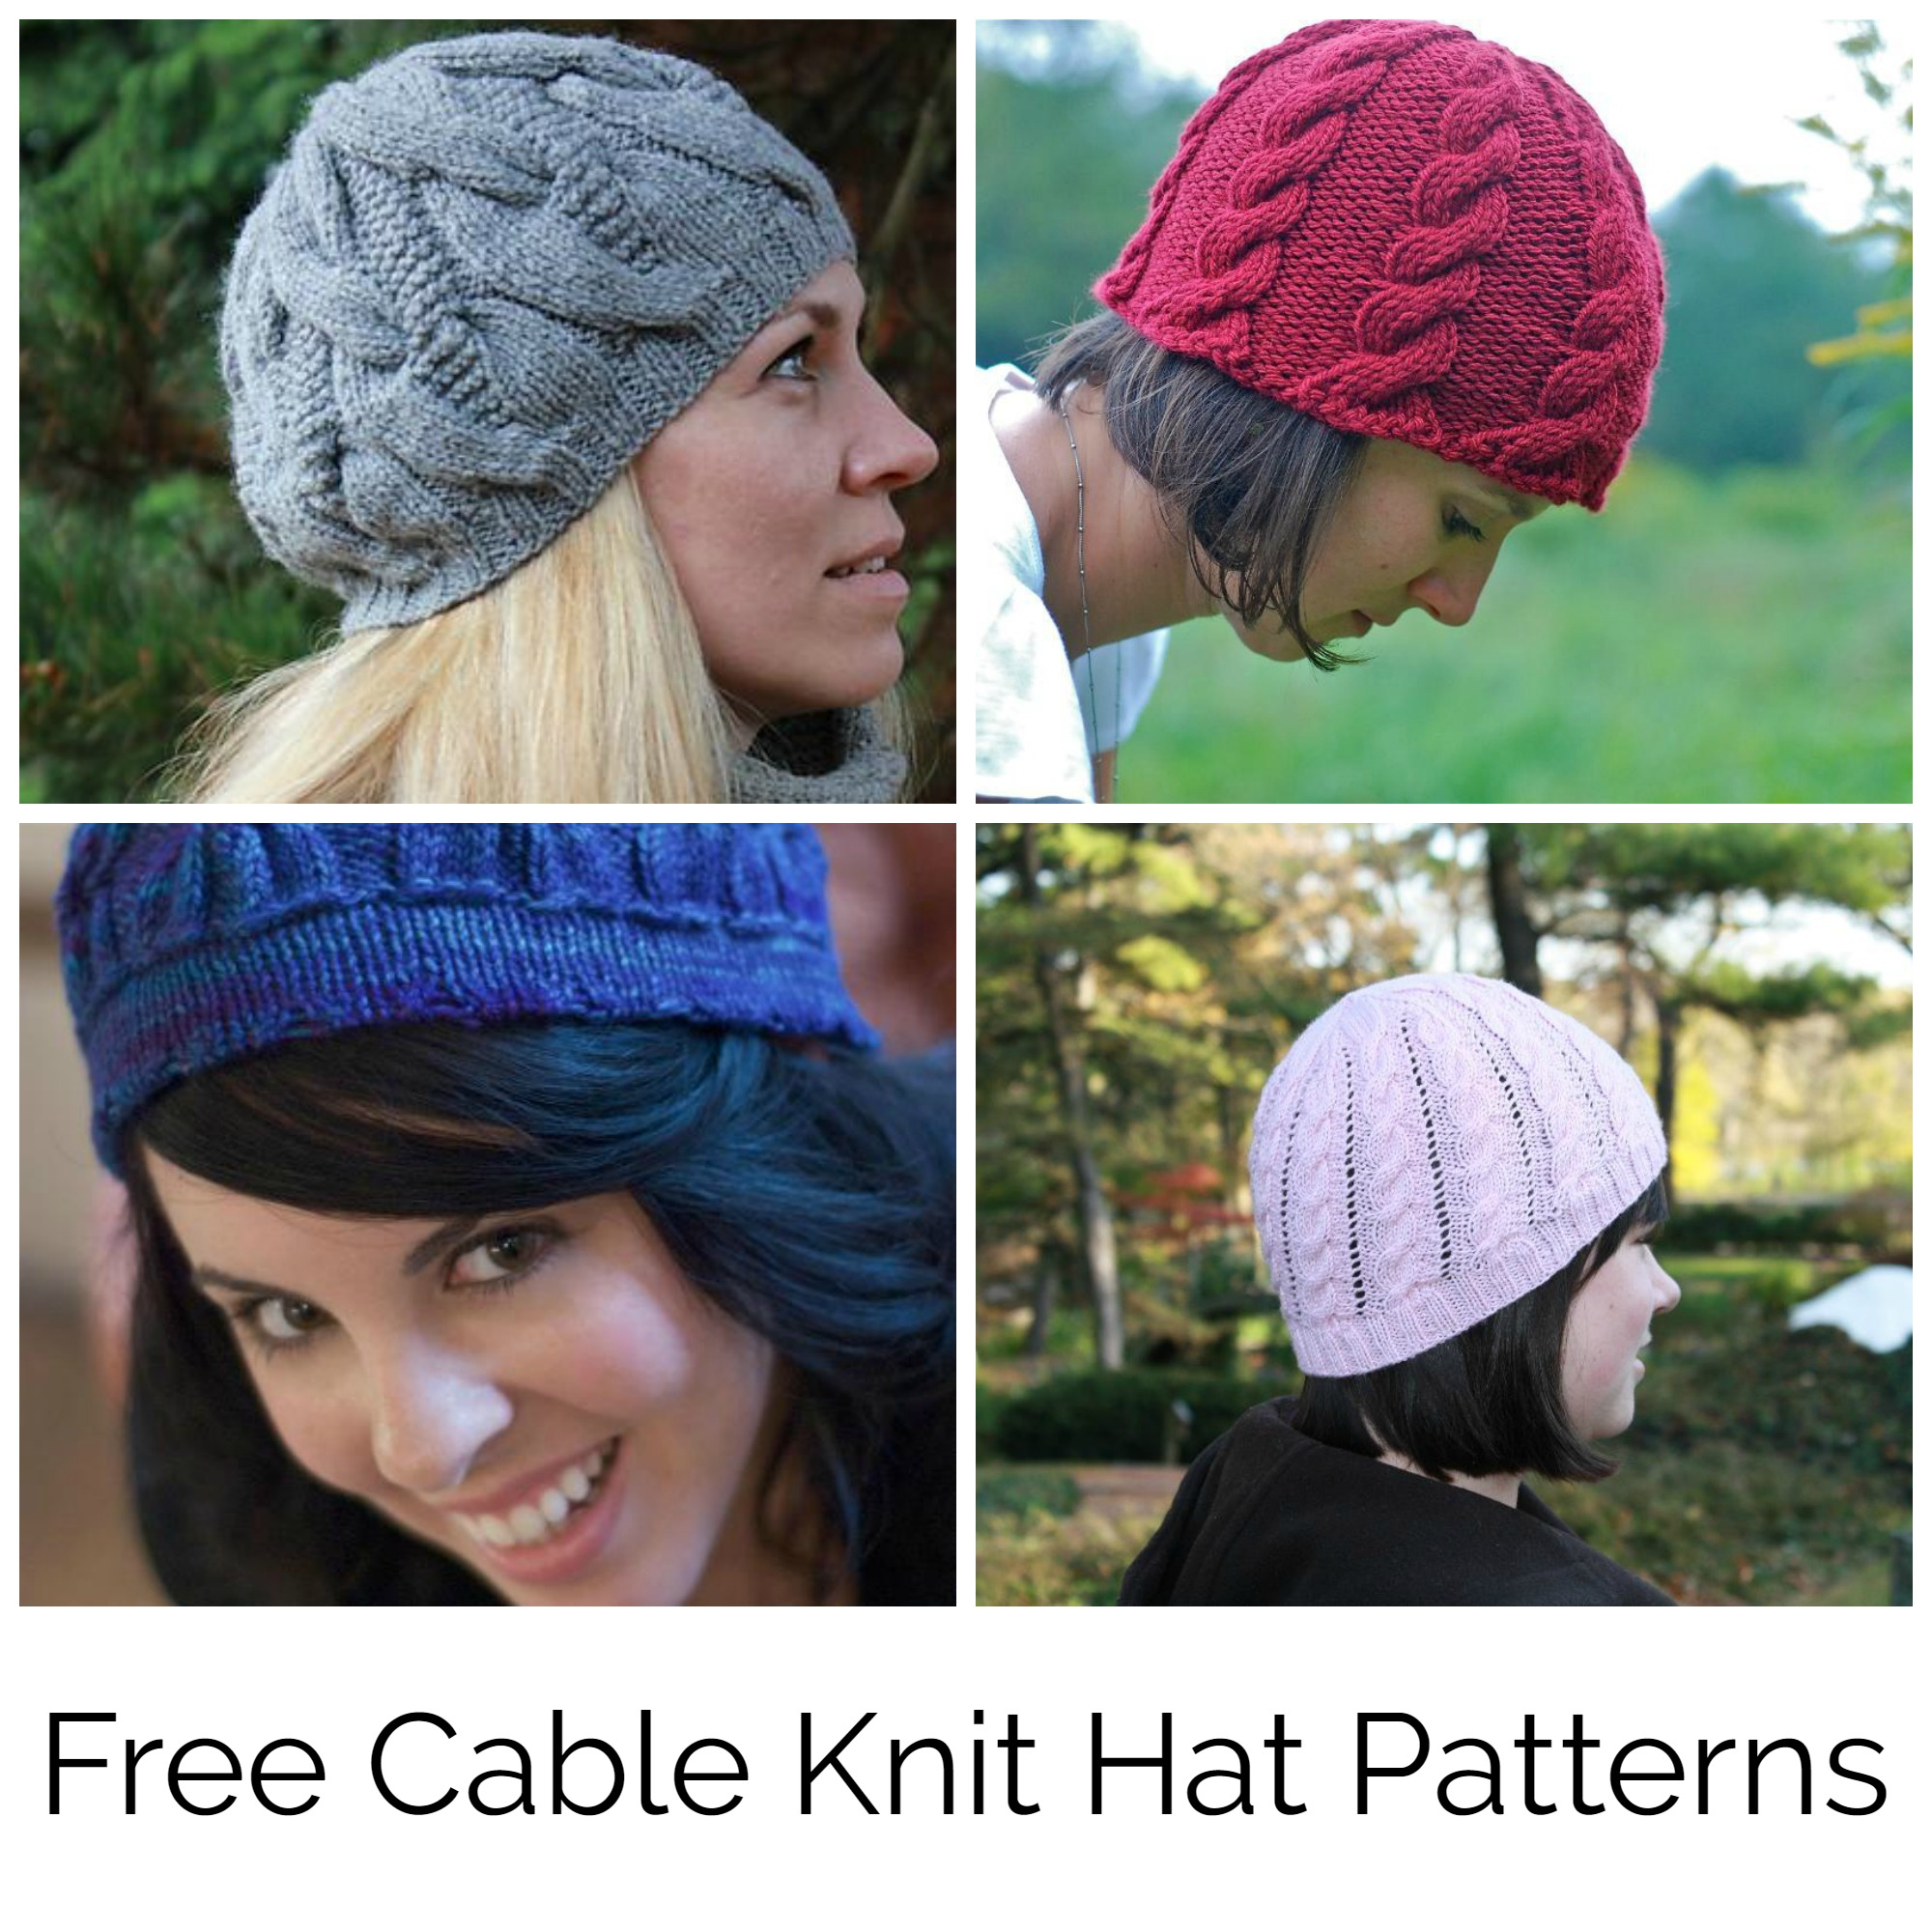 Knit Cap Patterns Find Your Favorite Free Cable Knit Hat Pattern